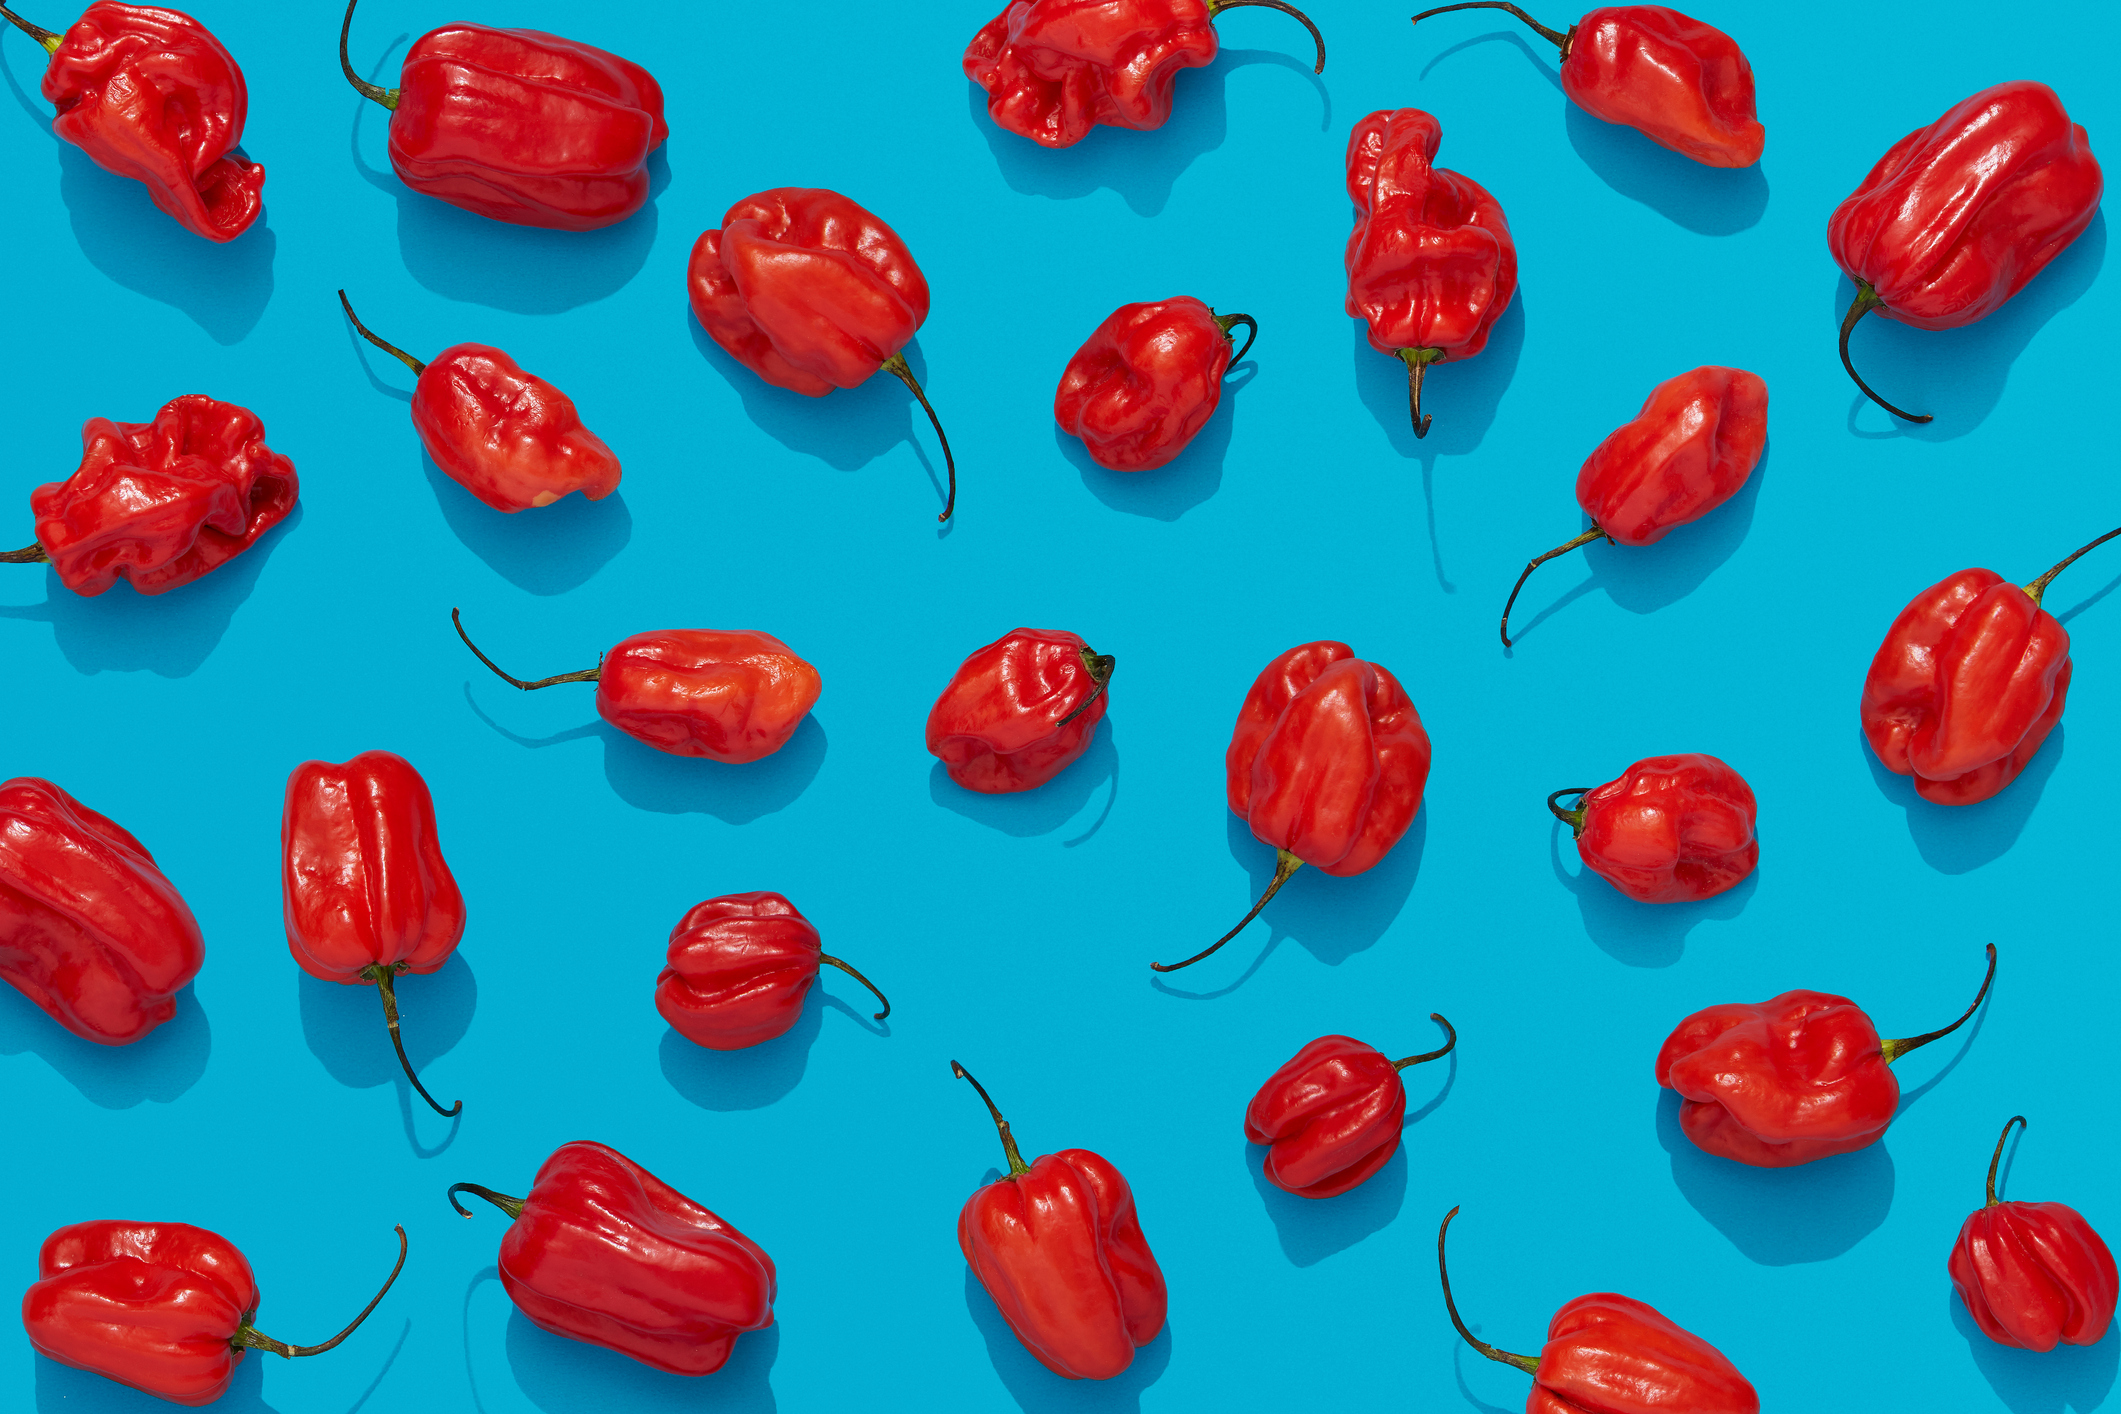 Capsaicin capsules may be the next big cancer thing